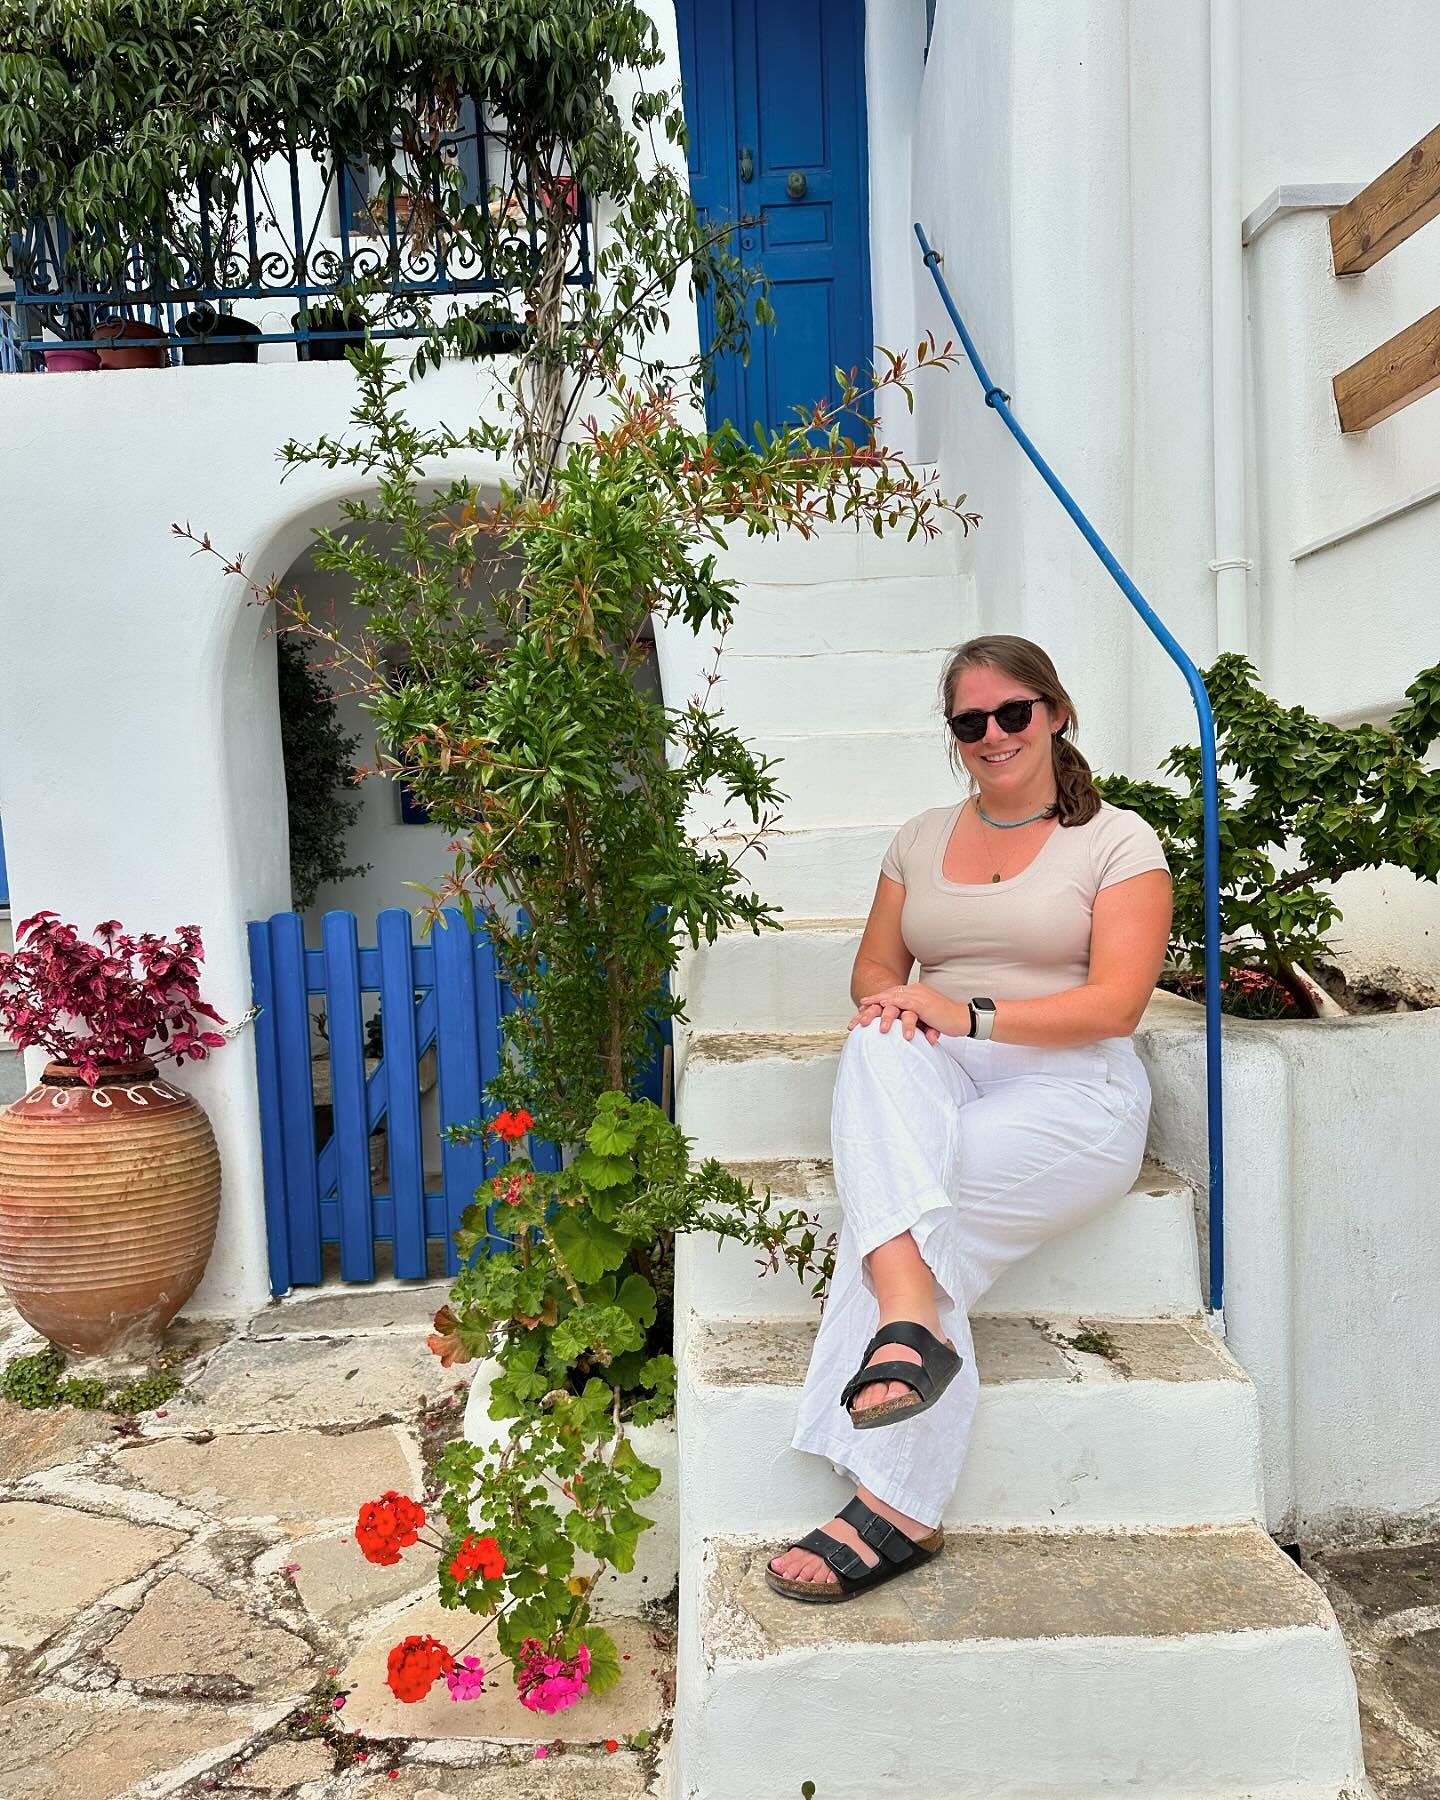 📍PAROS (part ✌🏼)

This was easily the most photogenic place I have ever visited, so it was impossible to narrow it down to just 10 pictures!! 

Do not miss the tiny villages of Lefkes and Marpissa (blink and you will miss them) on your next visit t